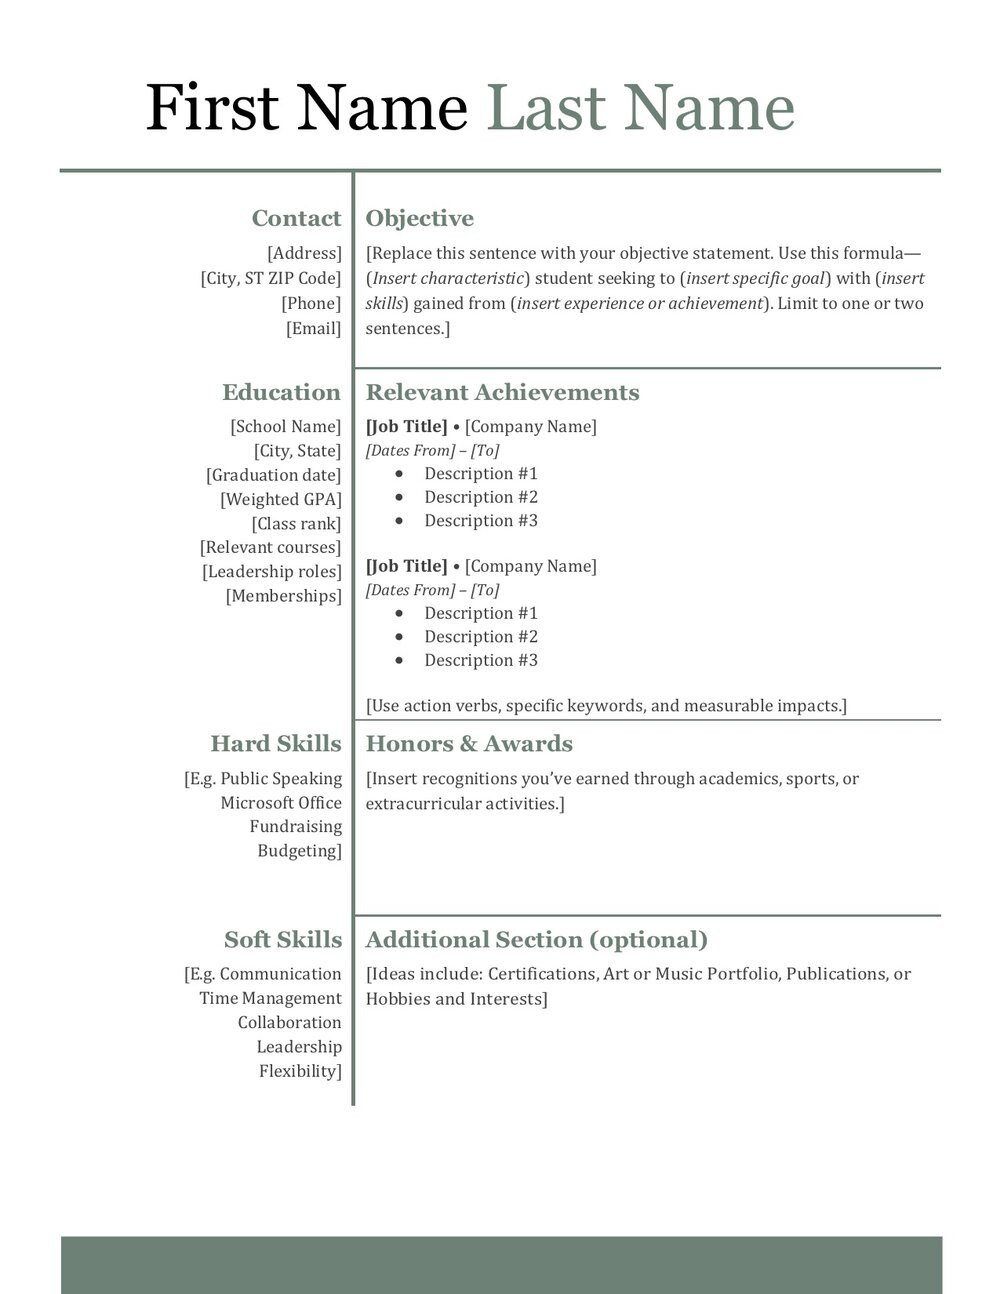 Sample Resume with High School Honors How to Write An Impressive High School Resume â Shemmassian …